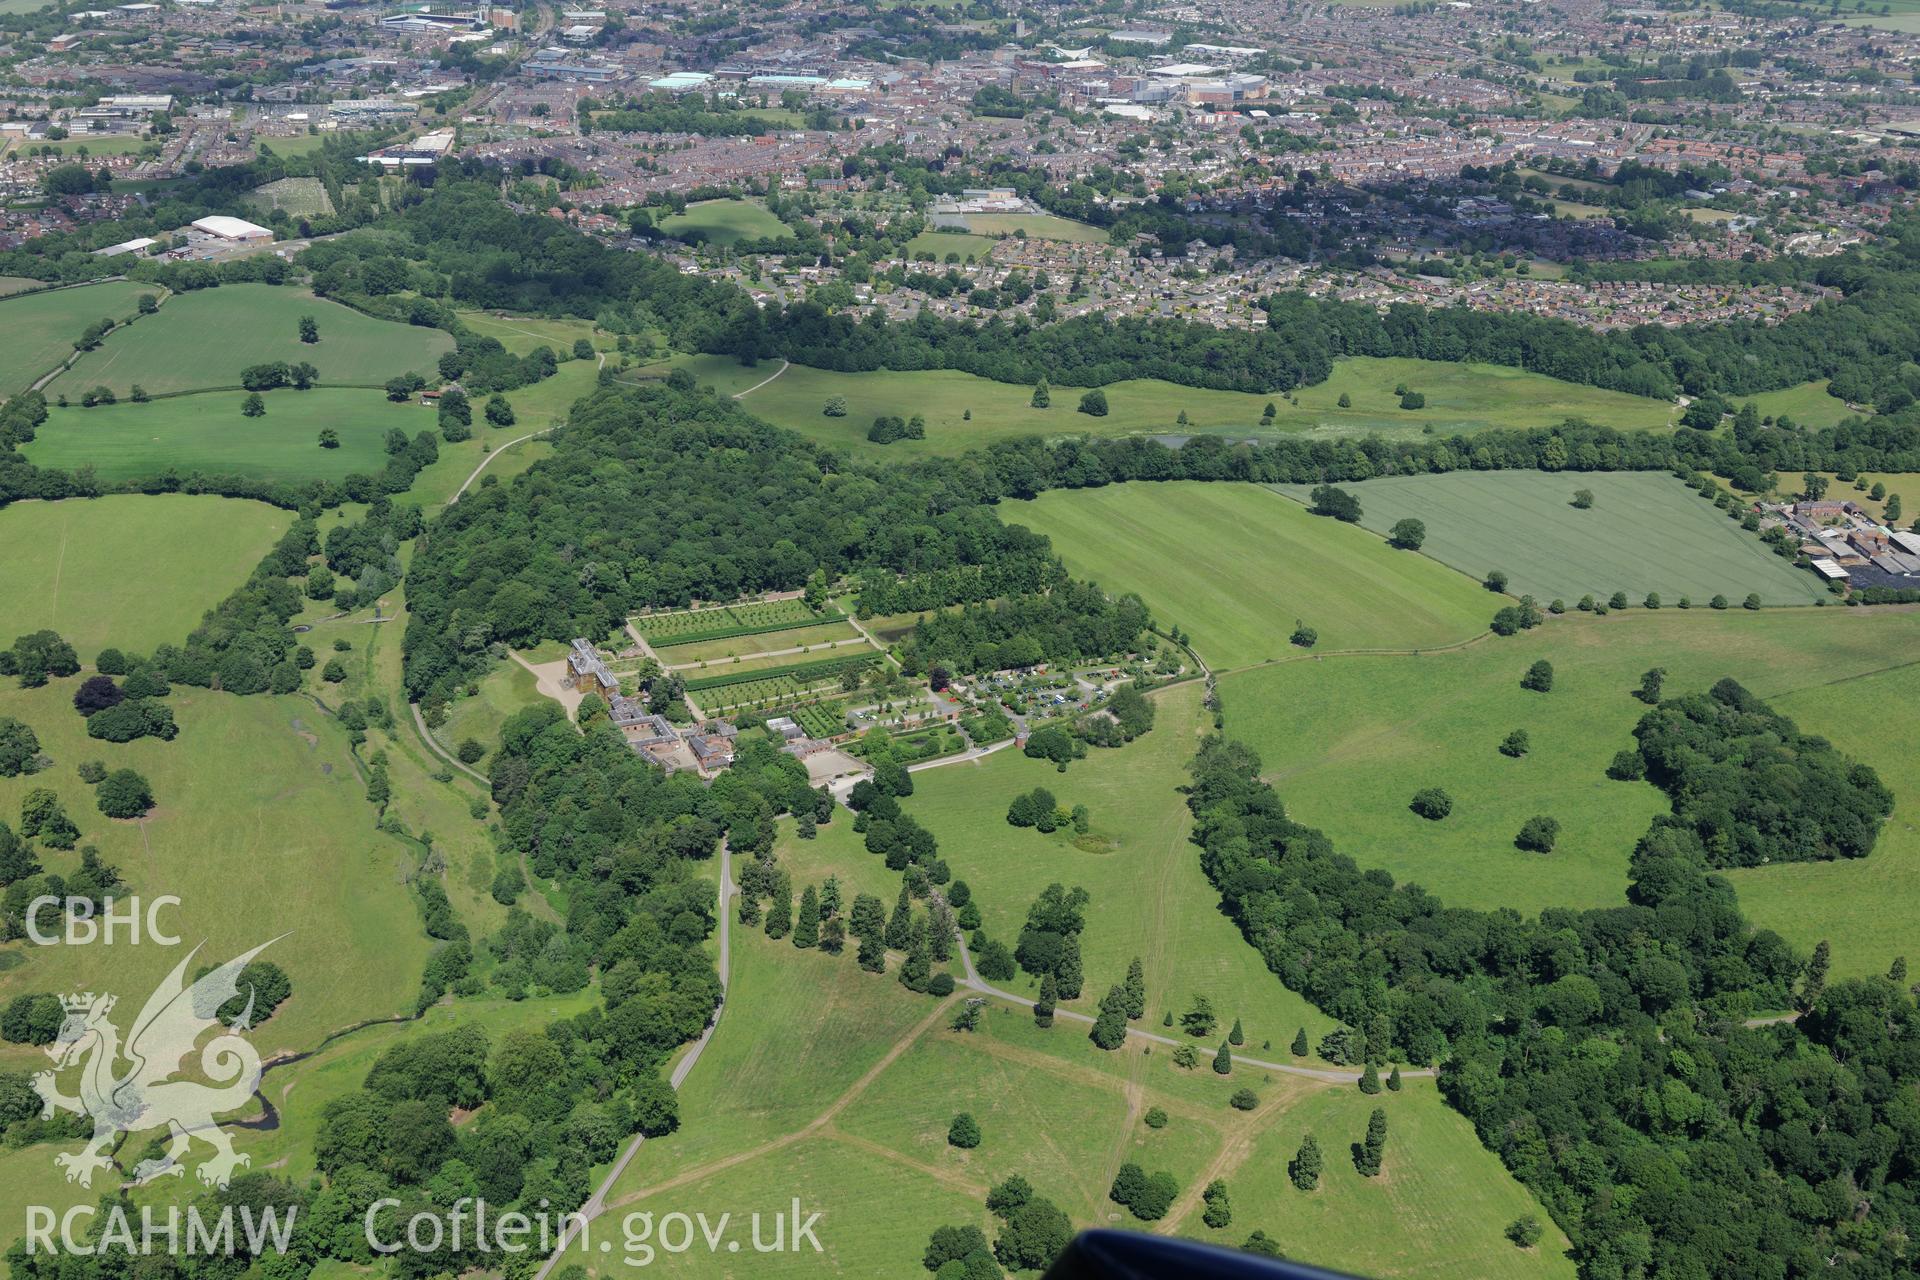 Erddig Hall and its gardens, with a deserted settlement in its park and the town of Wrexham beyond. Oblique aerial photograph taken during the Royal Commission's programme of archaeological aerial reconnaissance by Toby Driver on 30th June 2015.